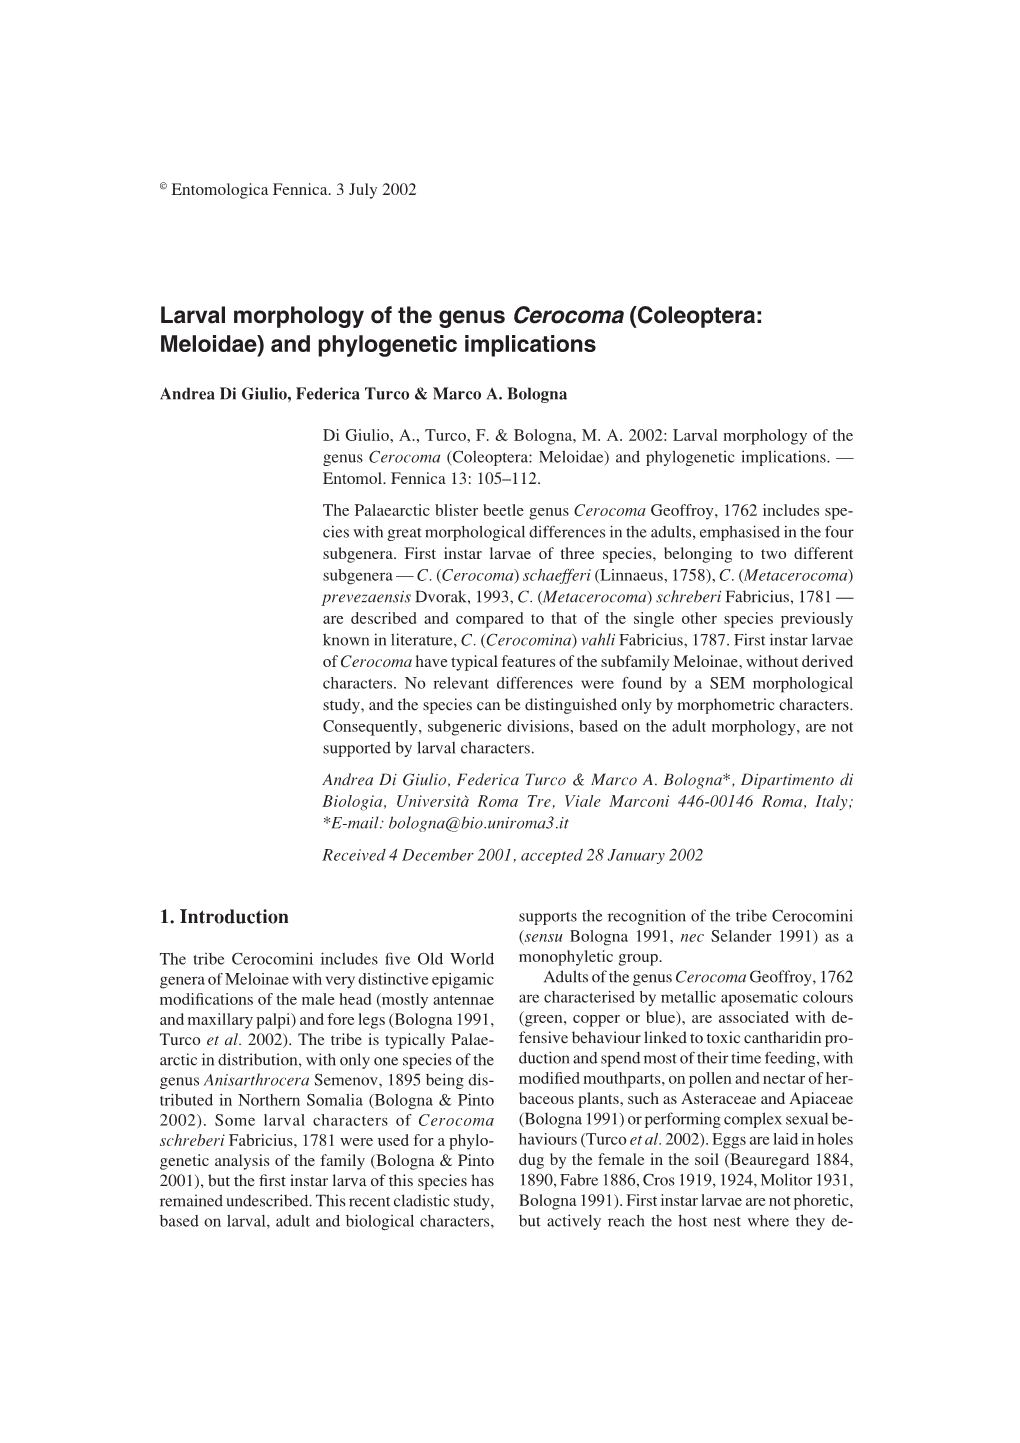 Larval Morphology of the Genus Cerocoma (Coleoptera: Meloidae) and Phylogenetic Implications